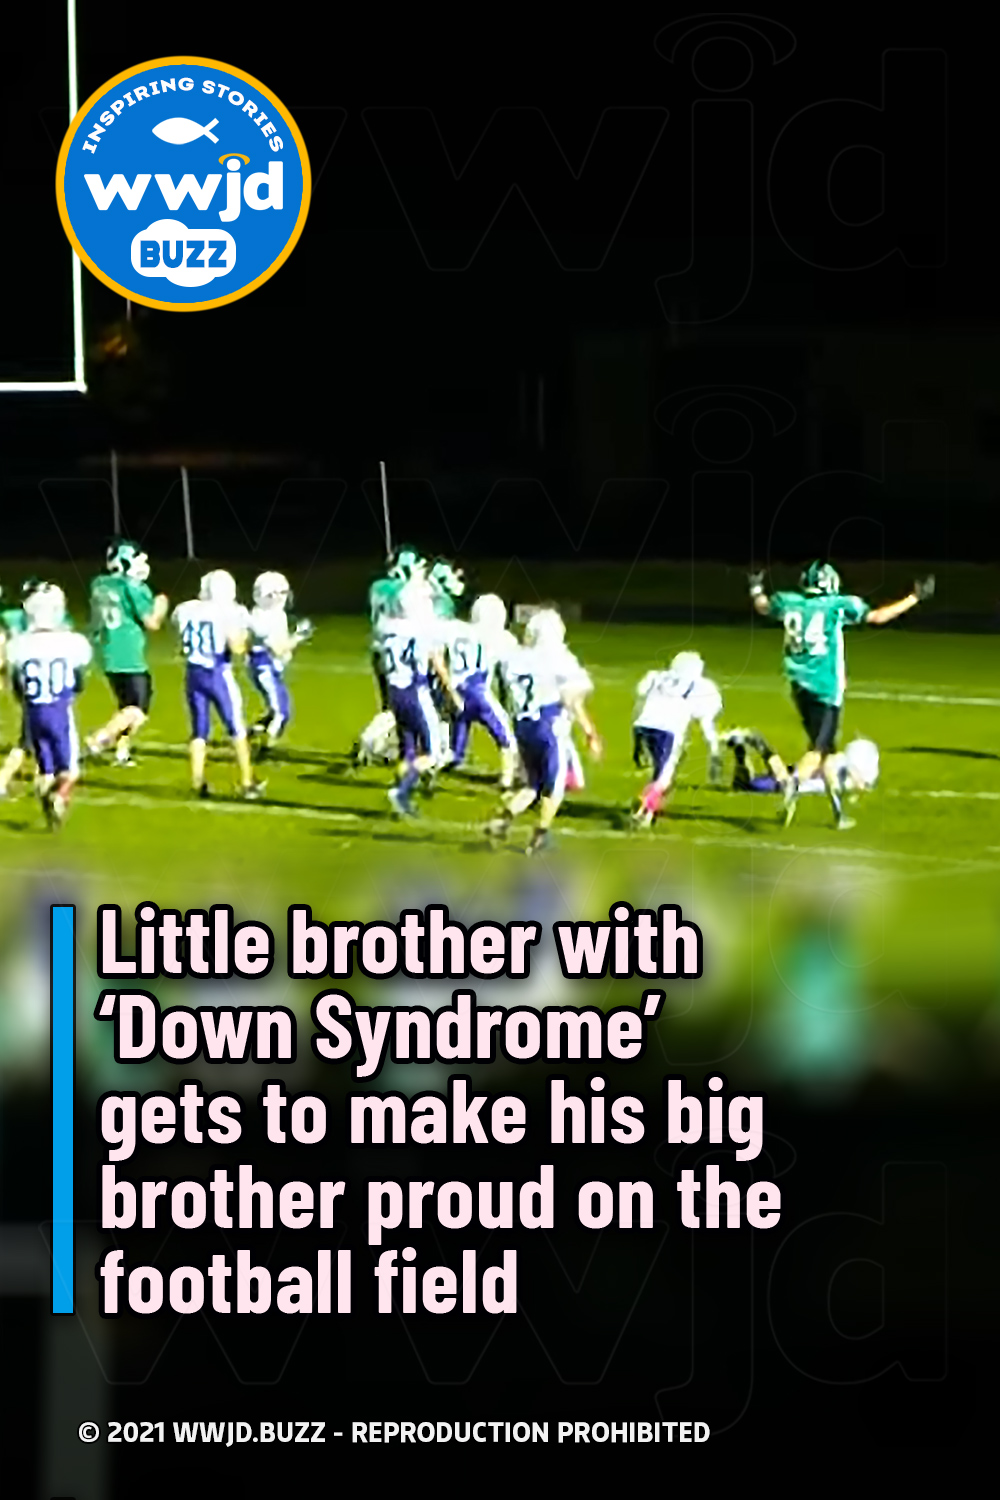 Little brother with ‘Down Syndrome’ gets to make his big brother proud on the football field